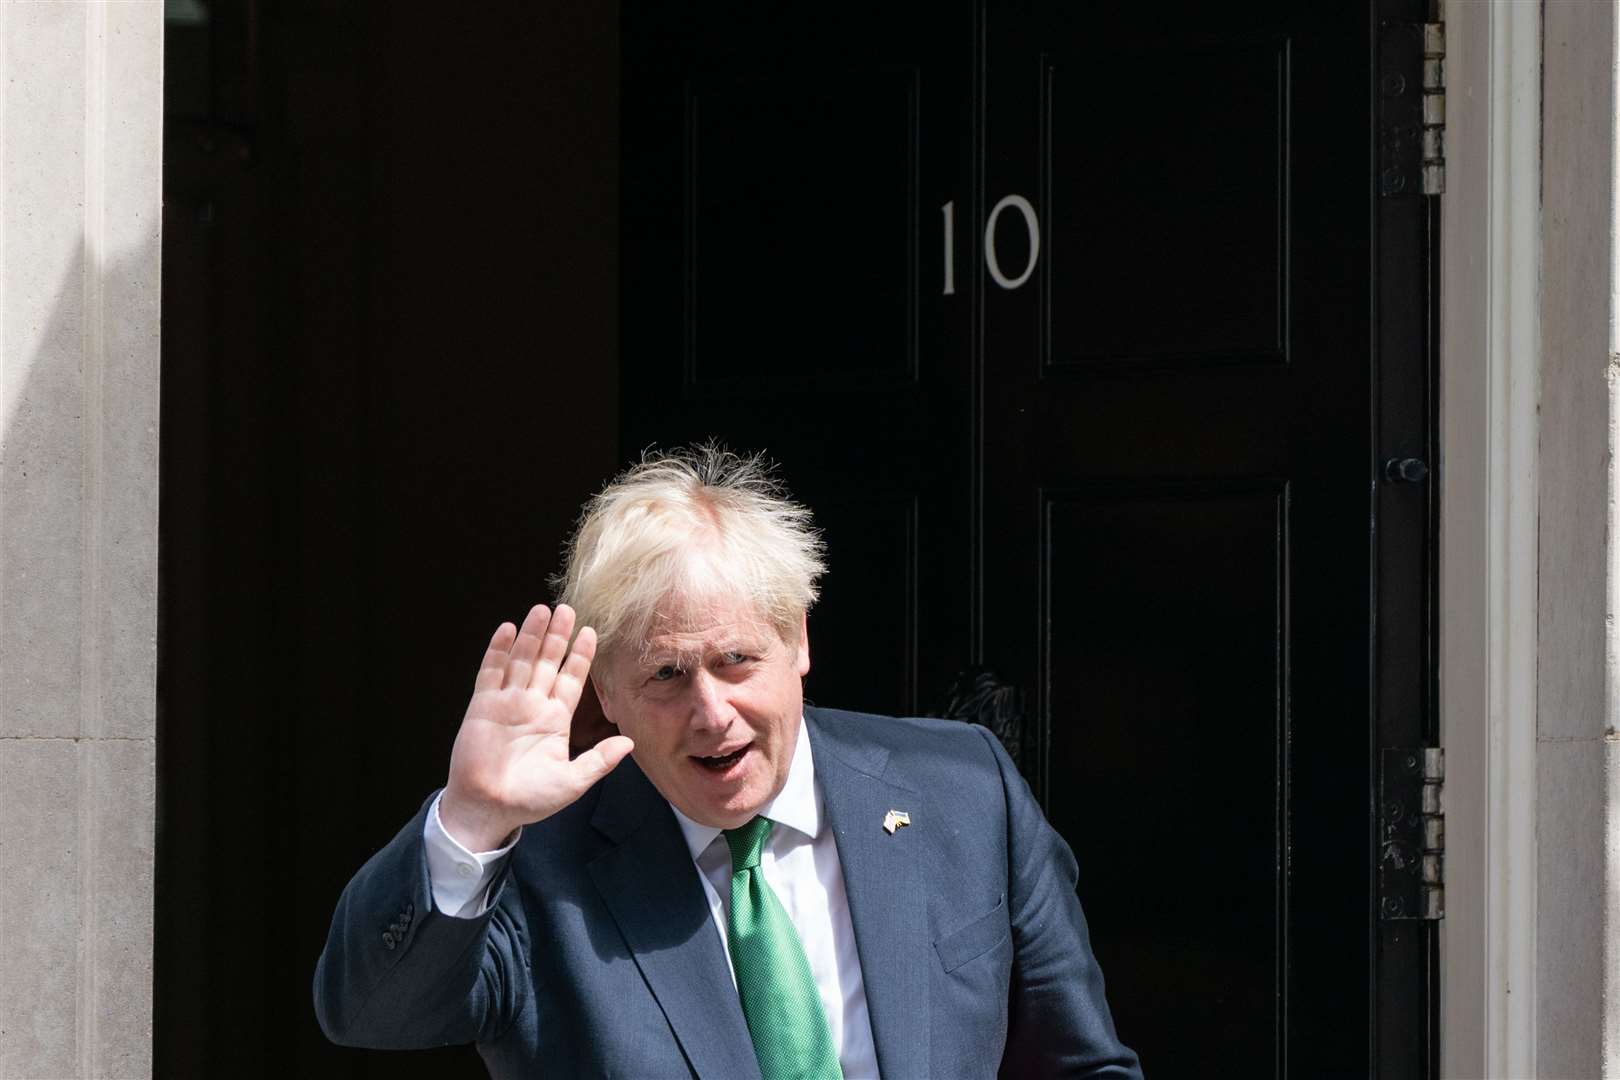 Then-prime minister Boris Johnson leaves No 10 Downing Street in July 2022 (Dominic Lipinski/PA)